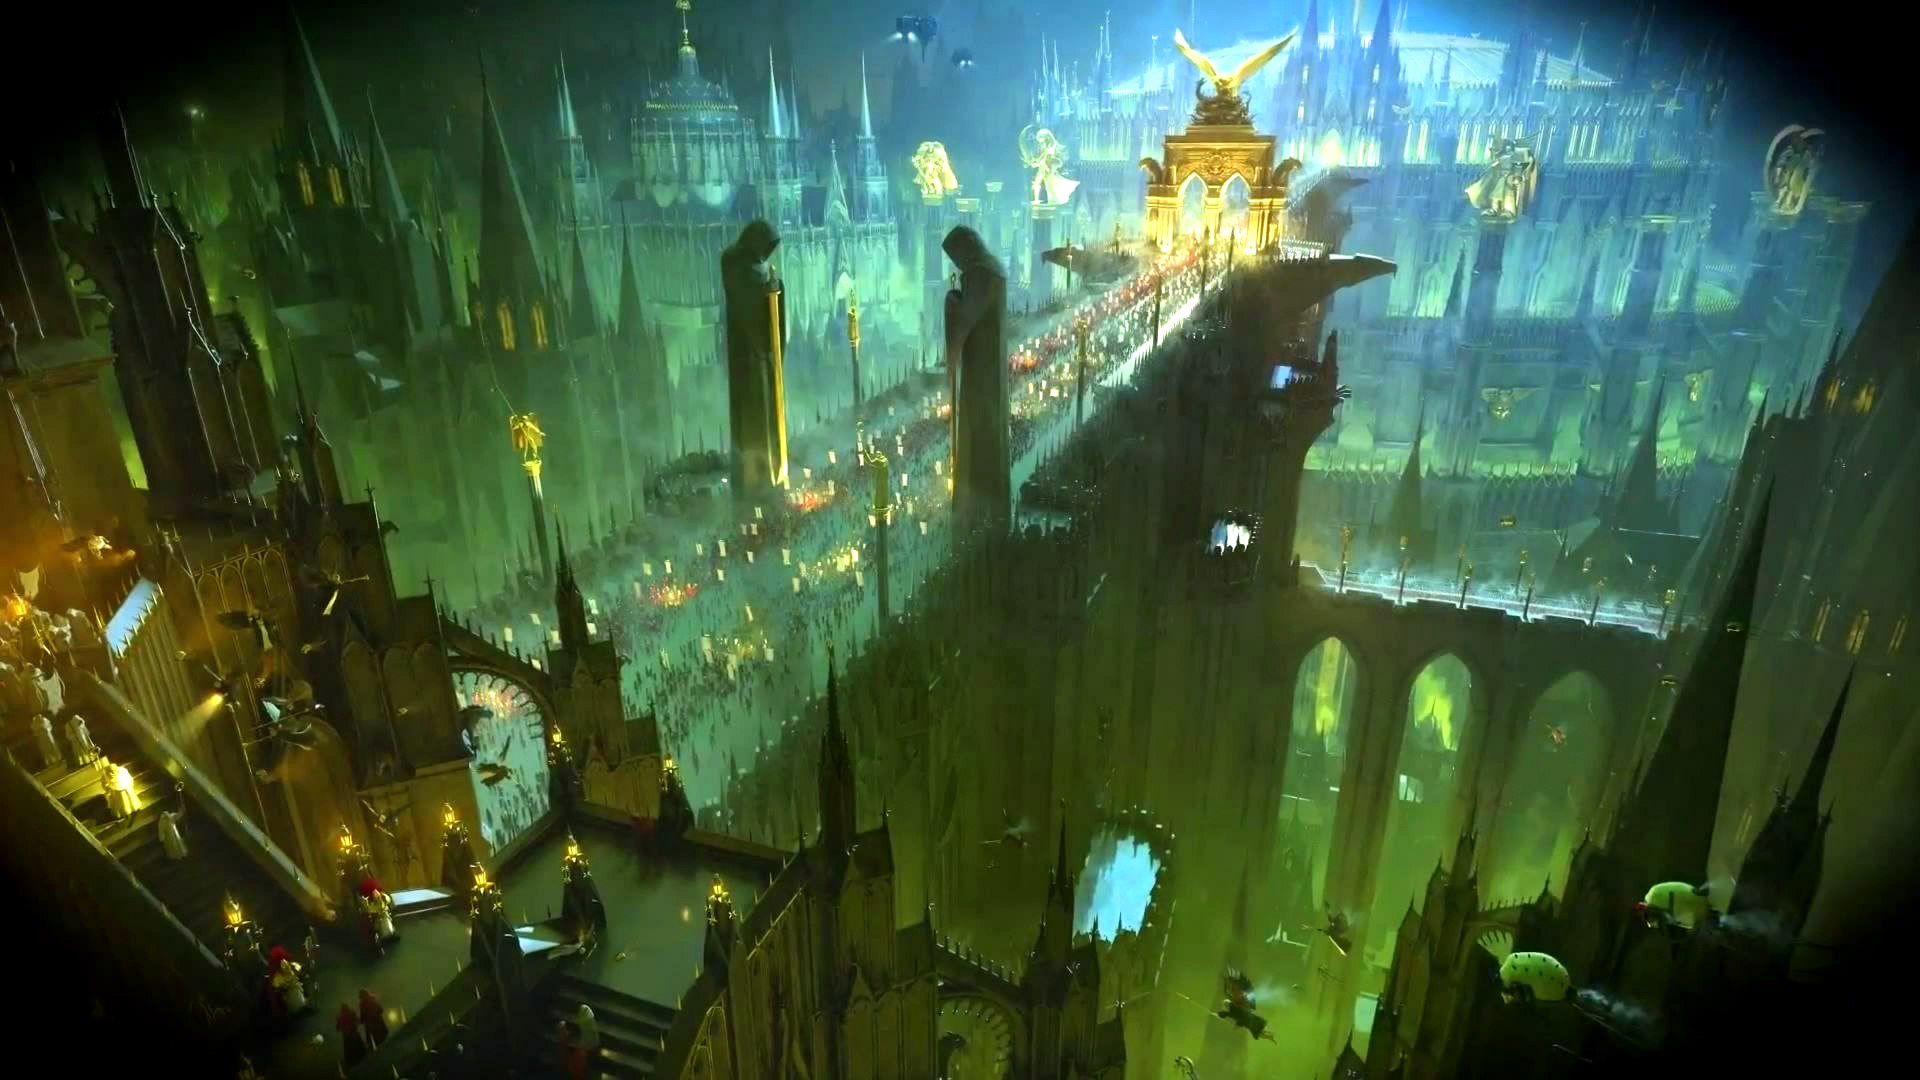 https://vignette.wikia.nocookie.net/warhammer40k/images/b/b5/Imperial_Palace_Terra2.jpg/revision/latest?cb=20130227172909